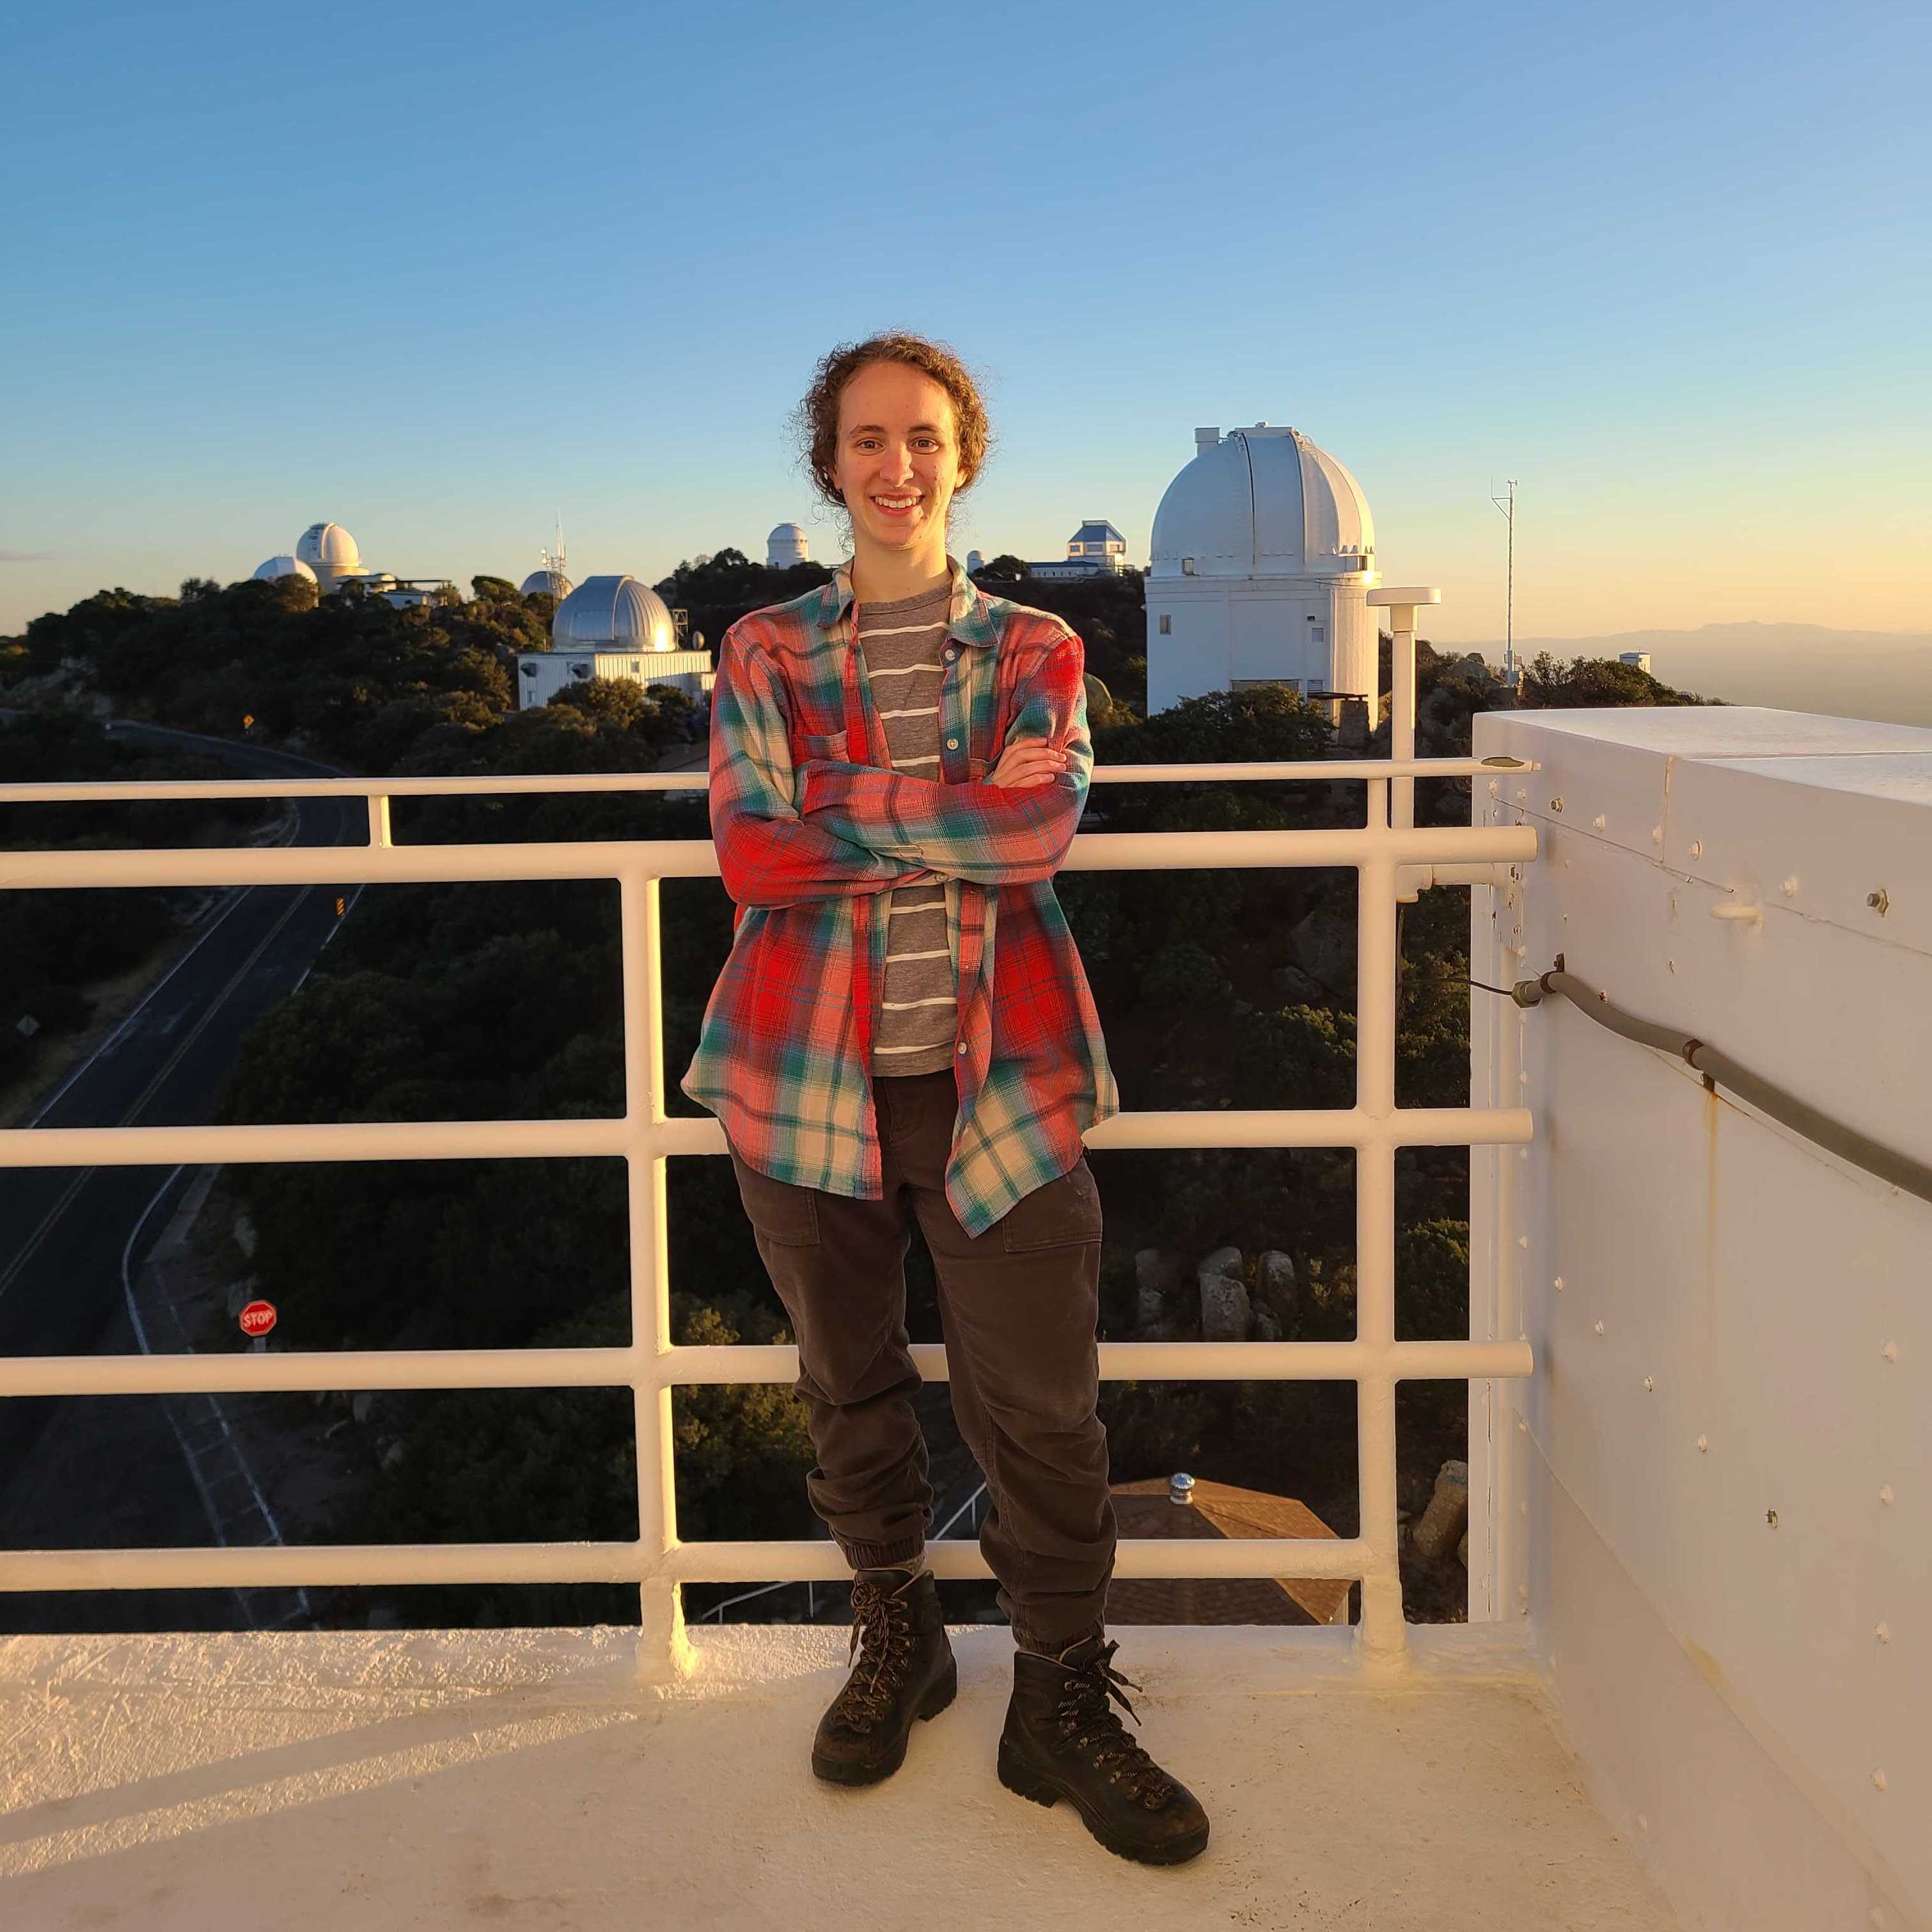 A womne with curly, dirty blond hair is standing on a balcony with a telescope dome in the background. She has dark pants and a plaid, long sleeved shirt, standing with her arms crossed and a smile on her face.